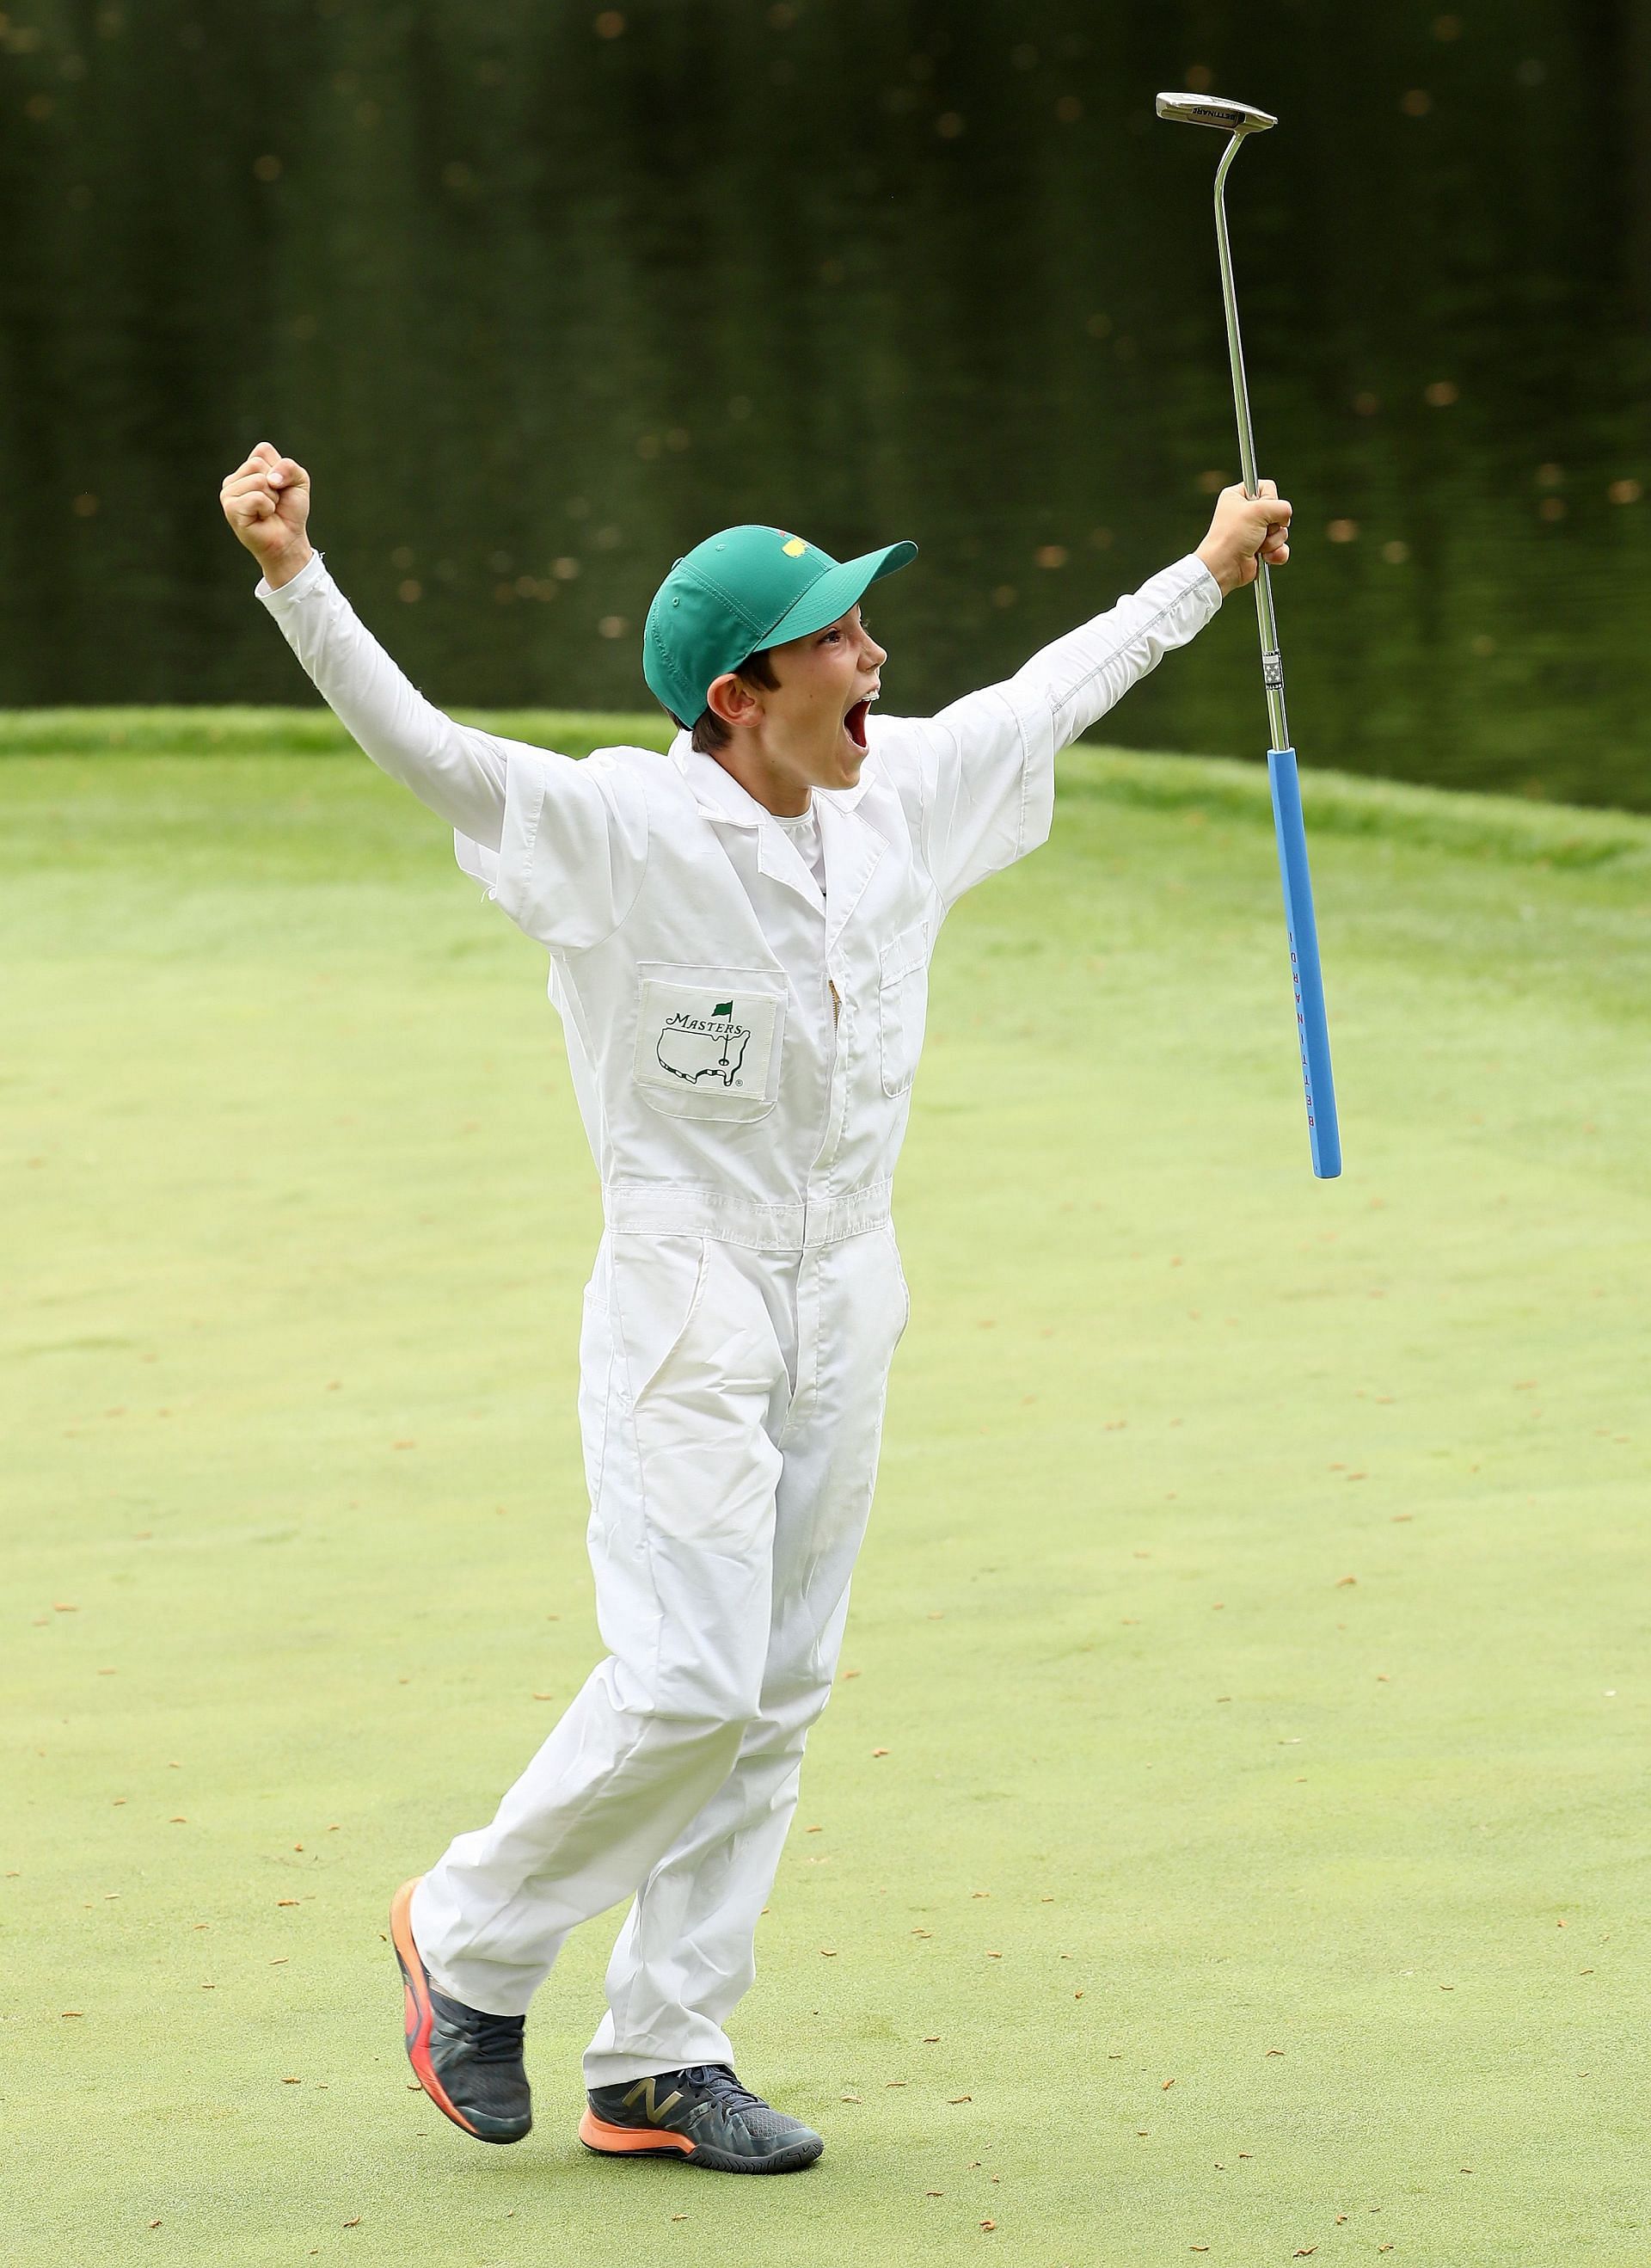 Cameron Kuchar at the PAR 3 Contest, prior to the start of the 2018 Masters Tournament (Image via Getty).